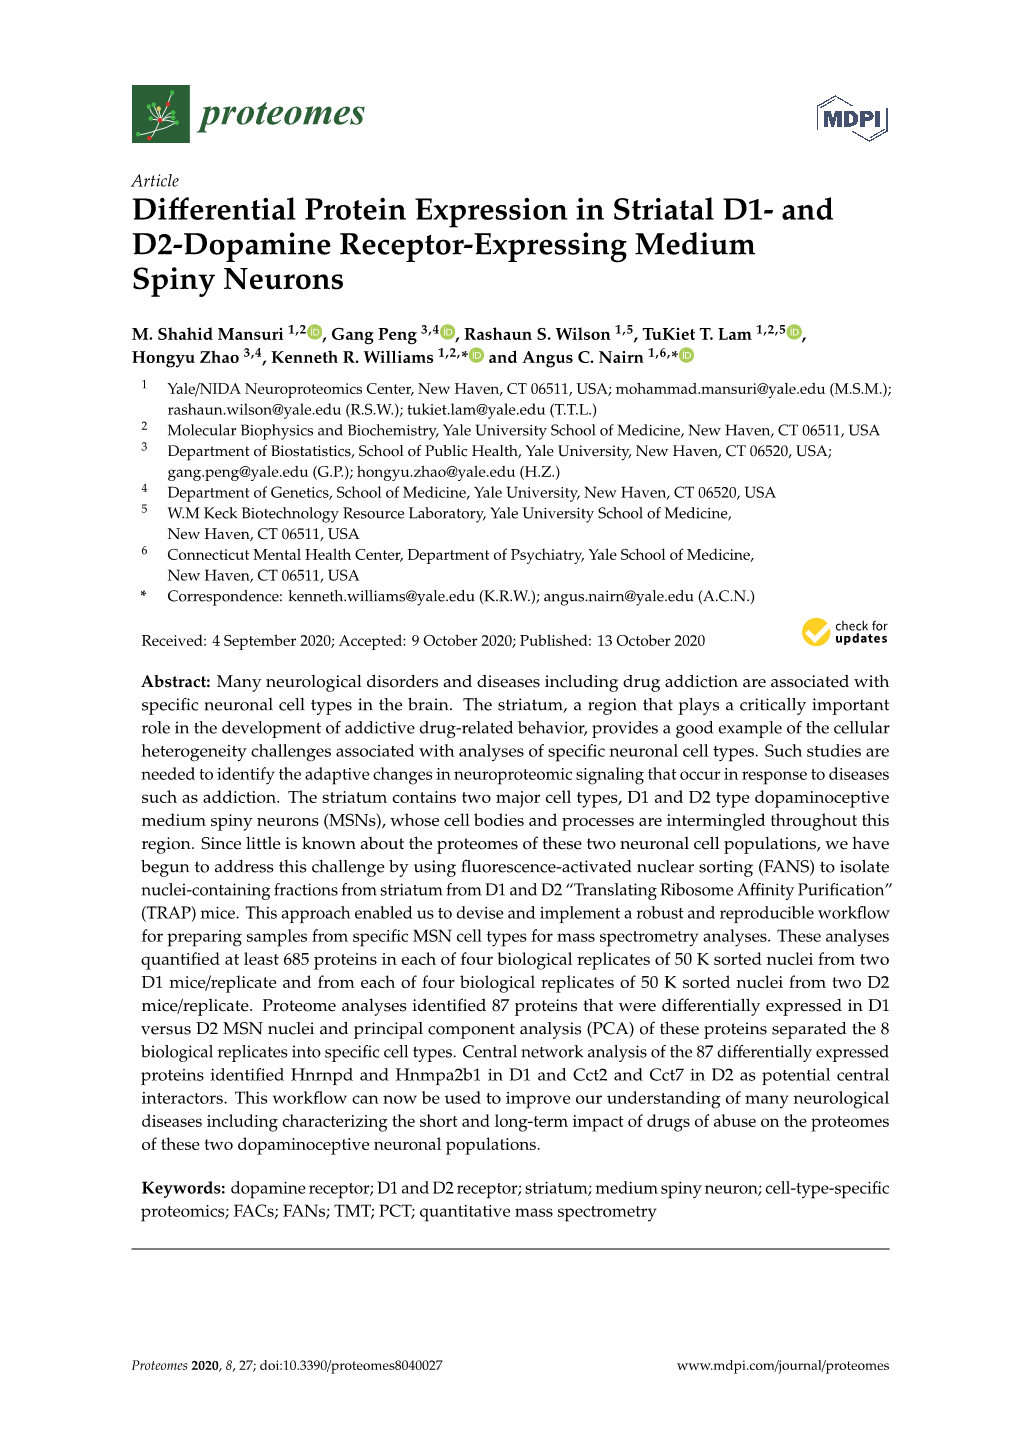 Differential Protein Expression in Striatal D1- and D2-Dopamine